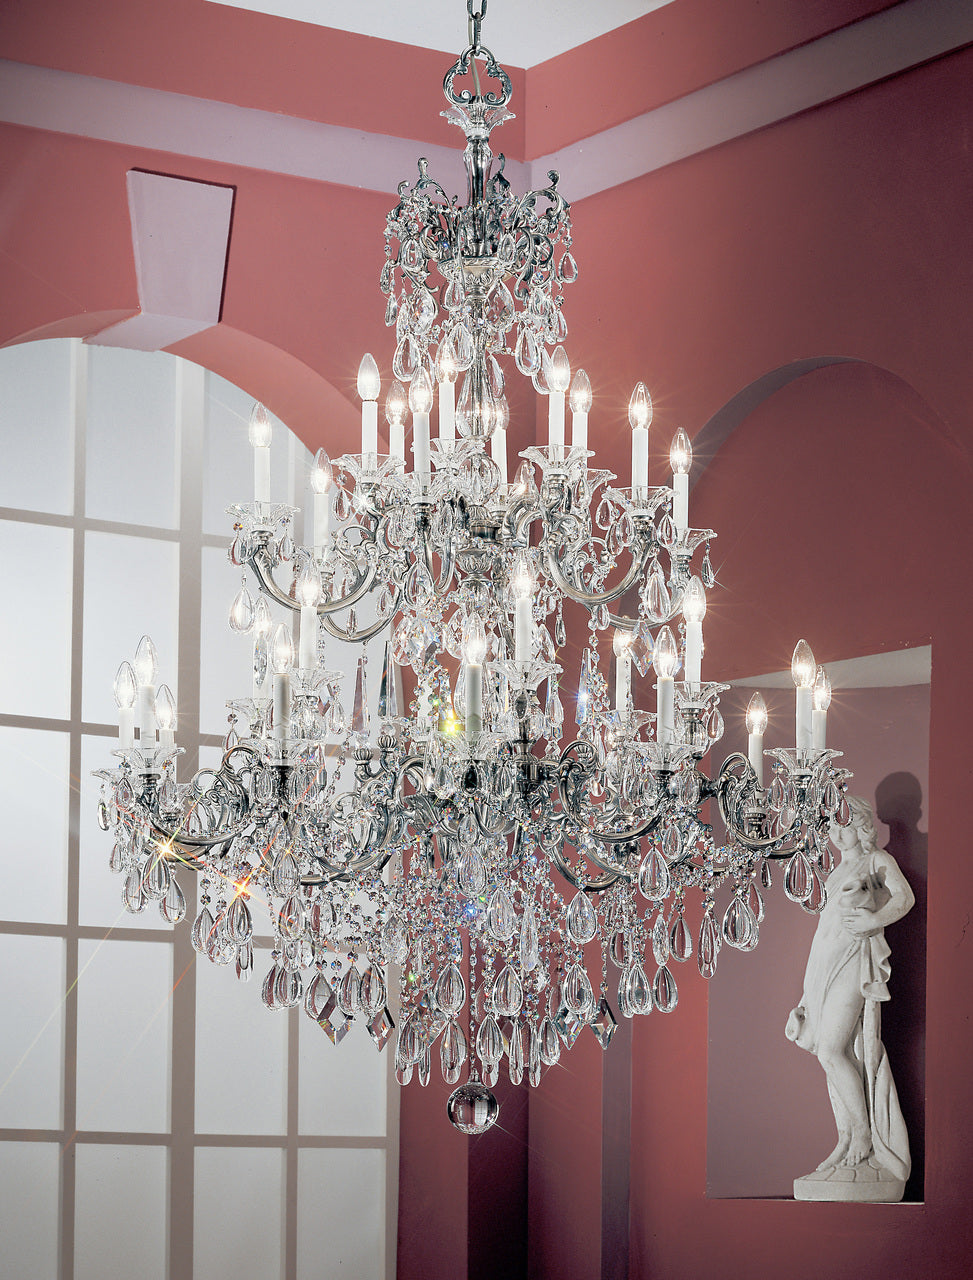 Classic Lighting 57030 MS CBK Via Venteo Crystal Chandelier in Millennium Silver (Imported from Spain)